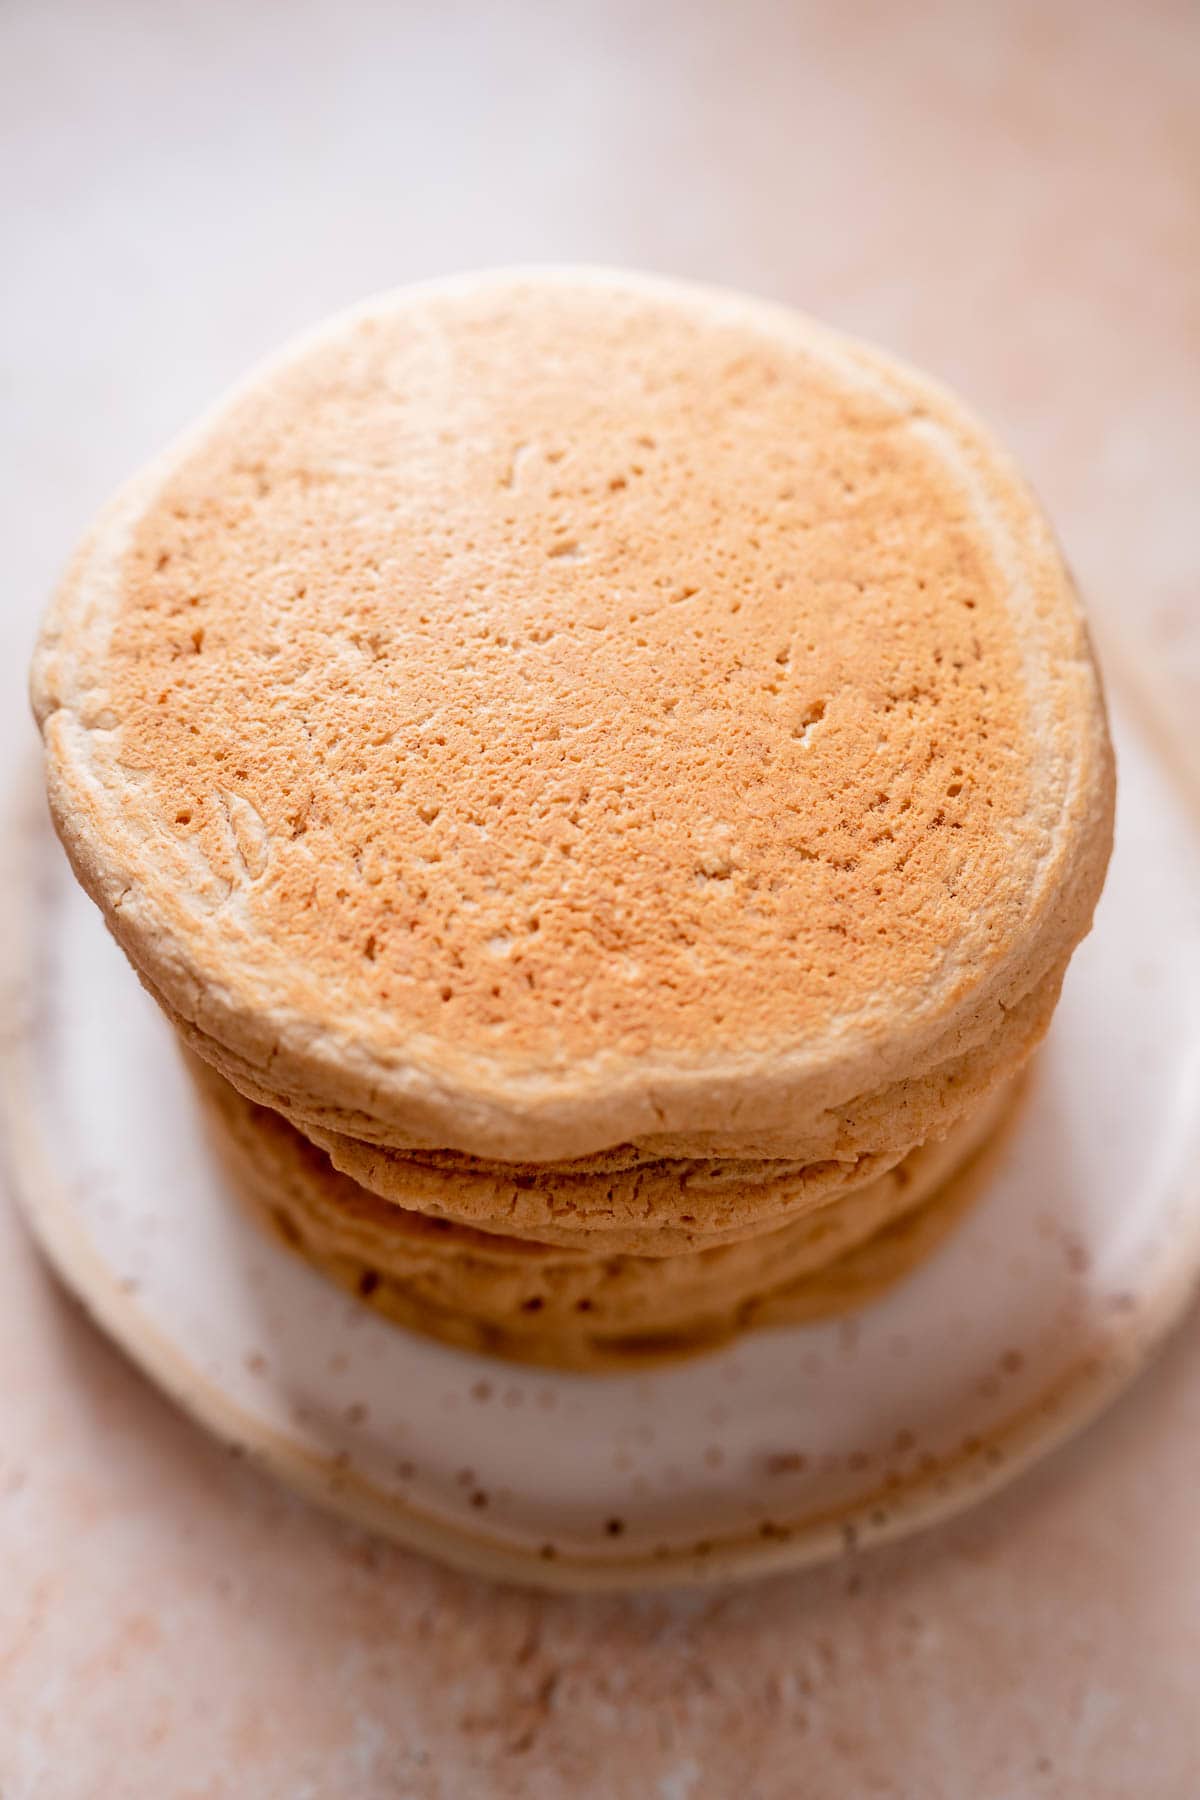 A stack of freshly made golden brown pancakes.